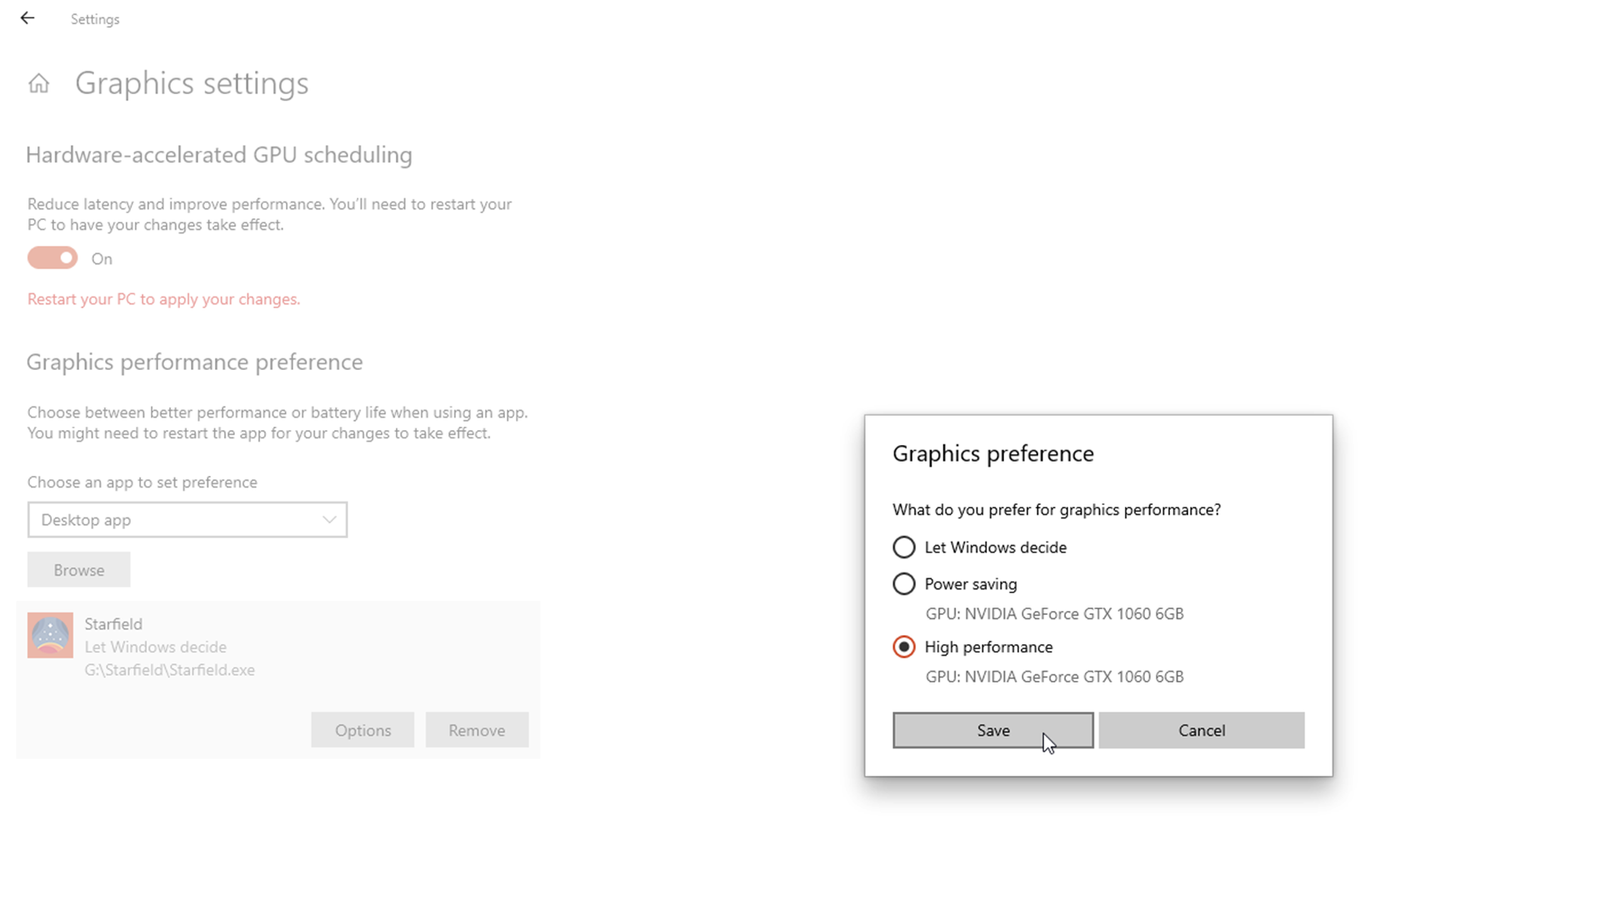 starfield graphics preferences settings